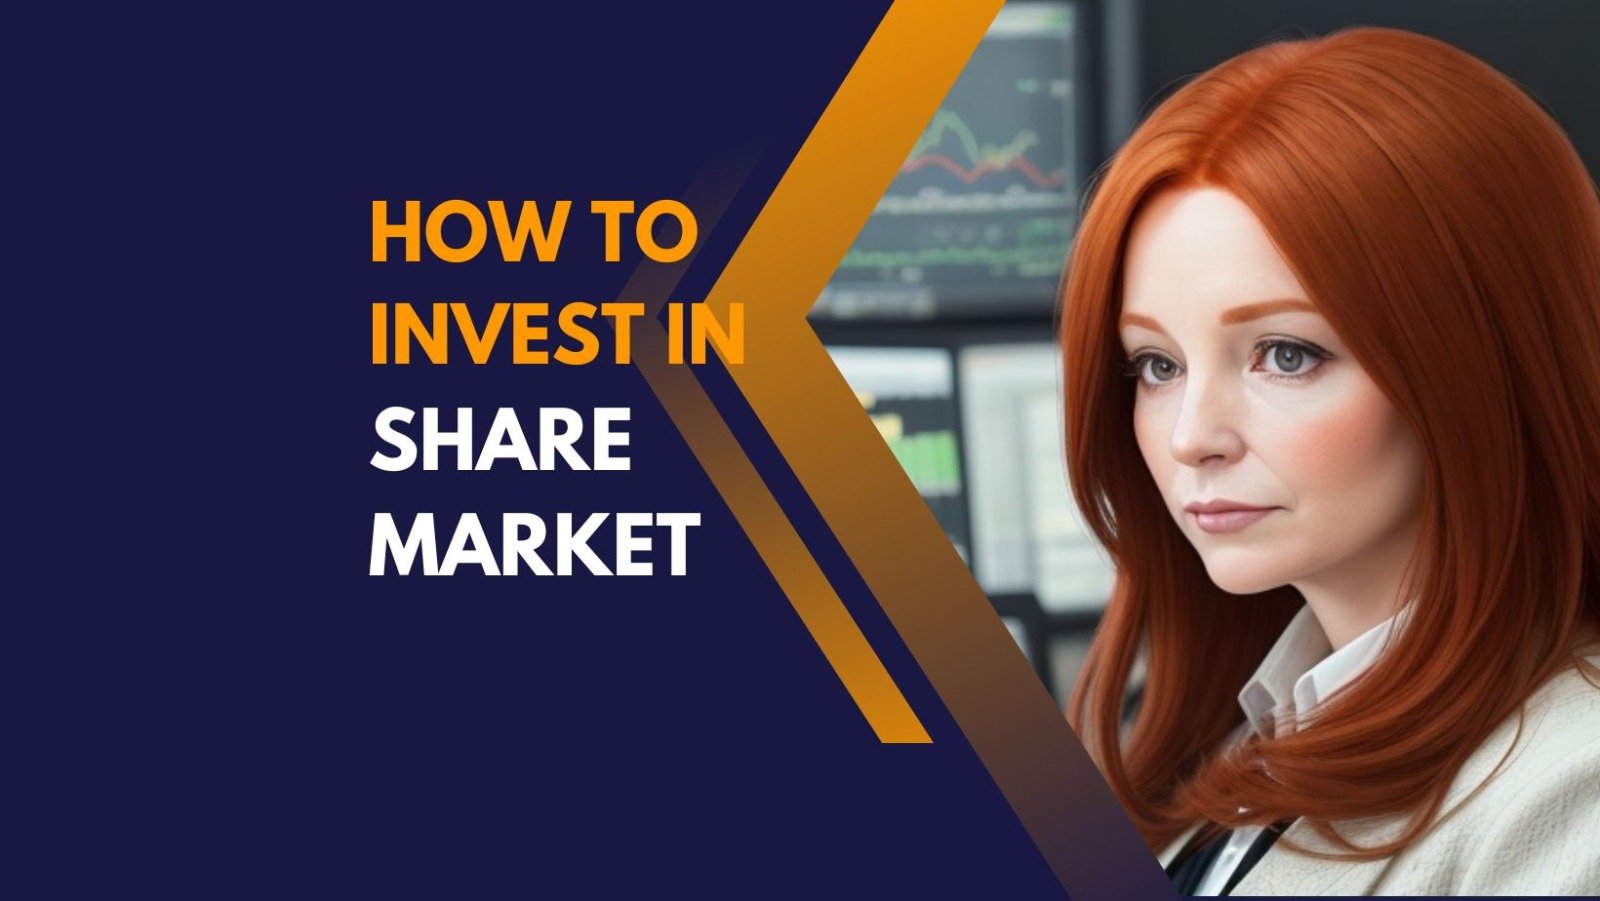 How to Invest in Share Market and Earn Money?